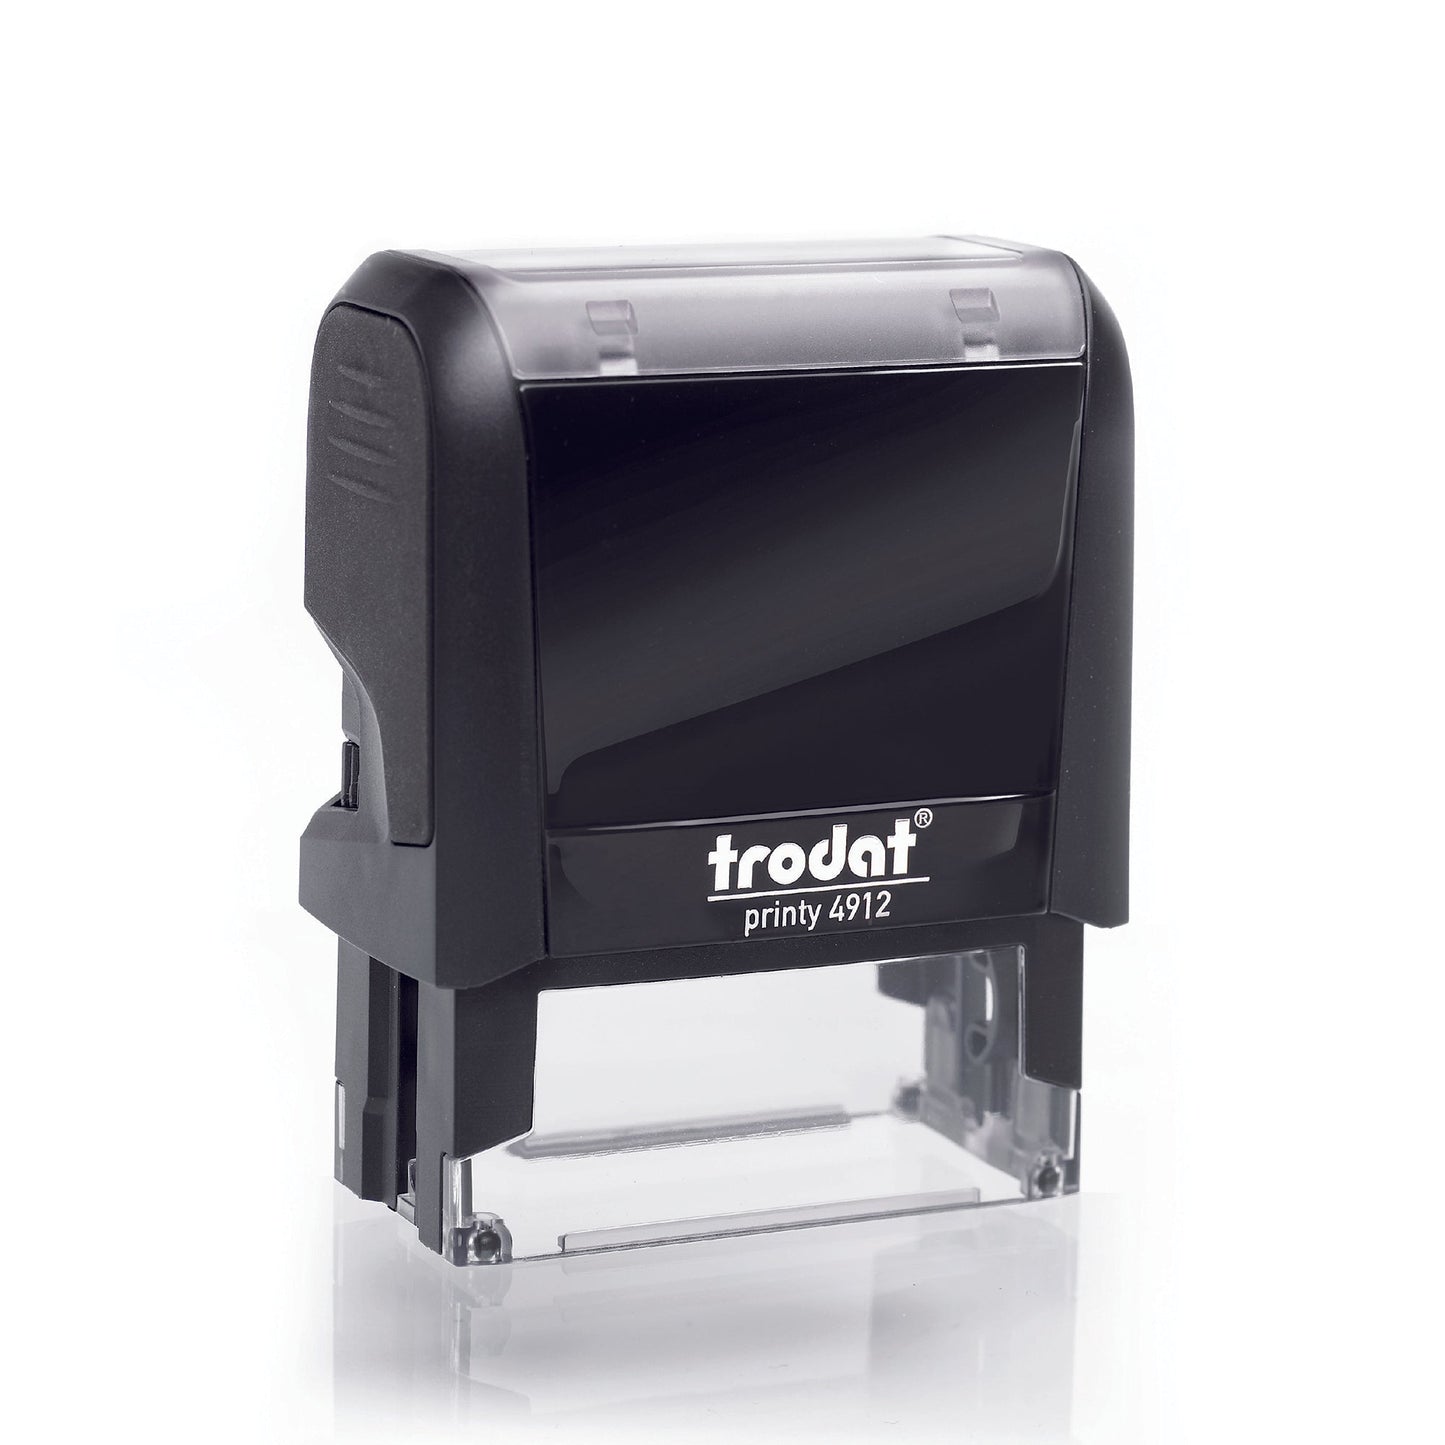 Refunded - Rubber Stamp - Trodat 4912 - 43mm x 16mm Impression